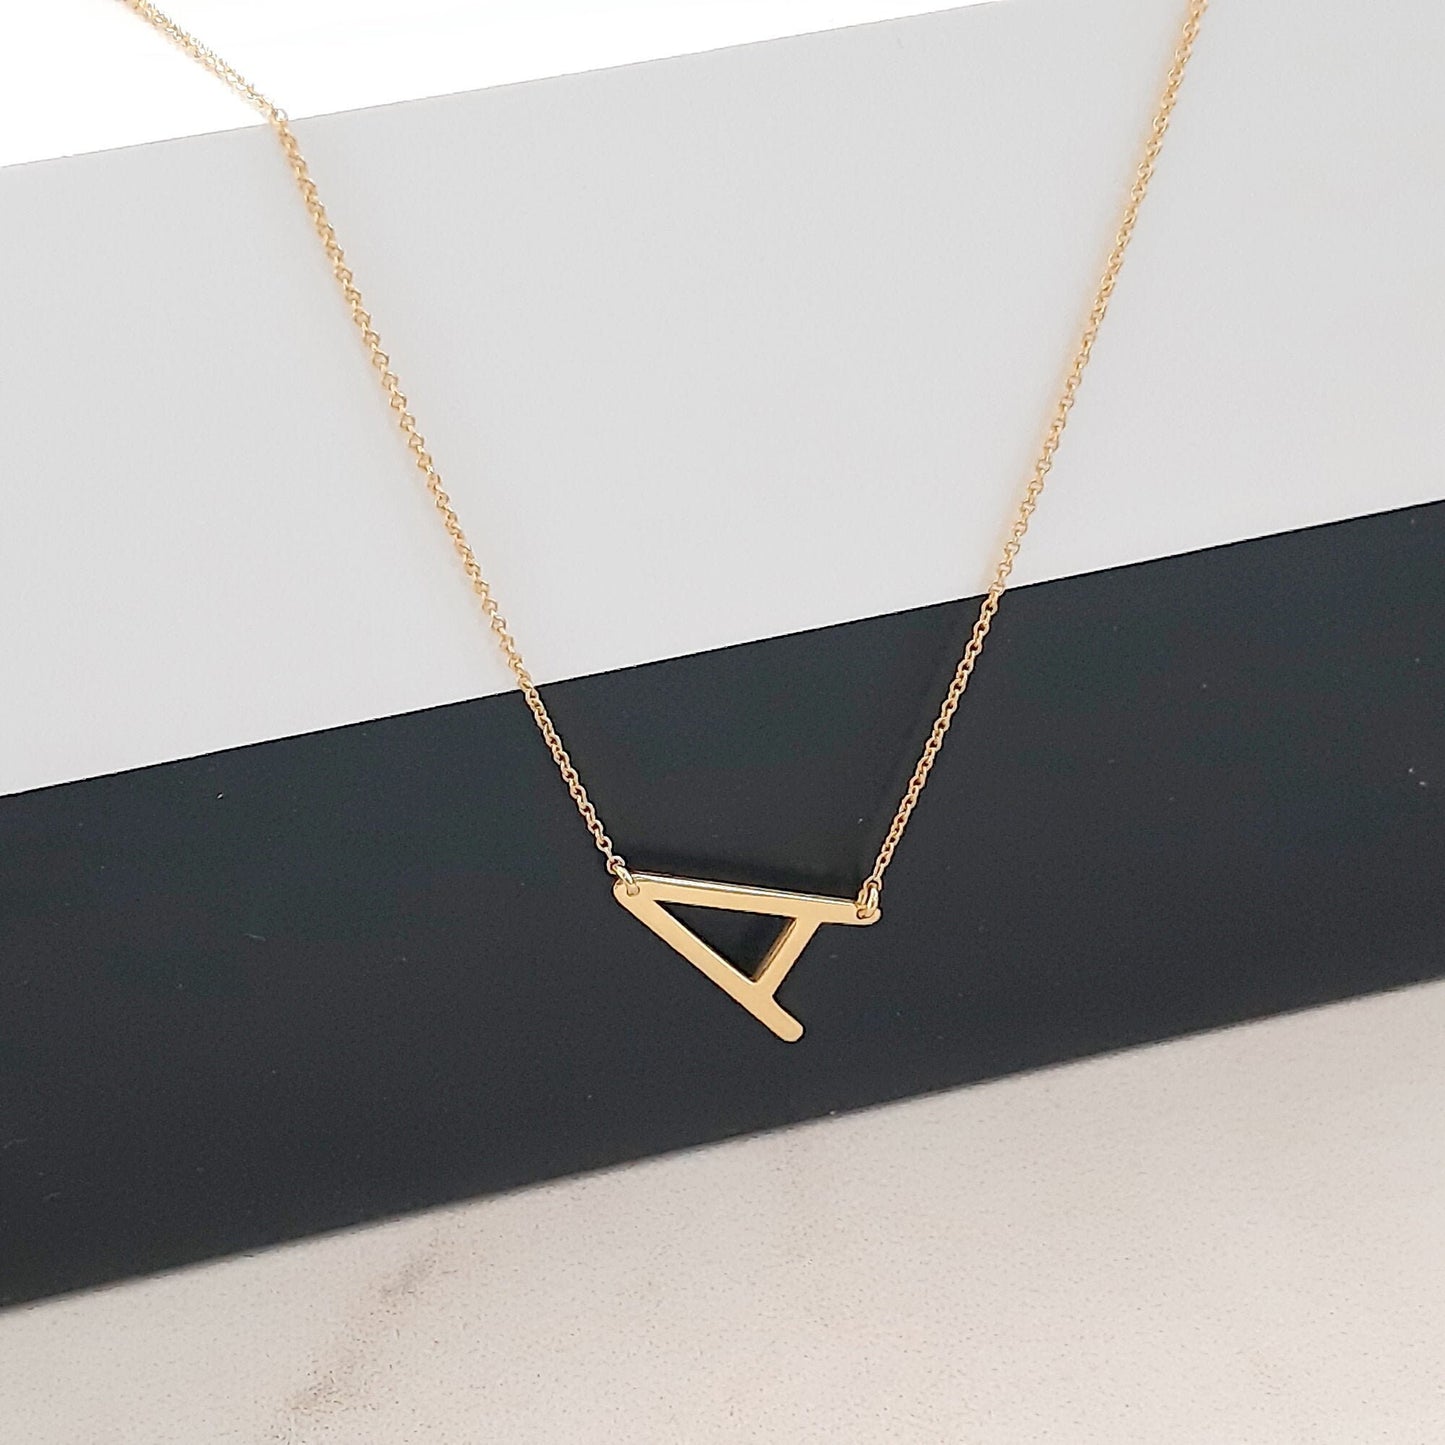 Letter Necklace /  Initial Necklace / Monogram Necklace / Solid Gold Letter Necklace / Personalized Necklace / Statement Layering Necklace